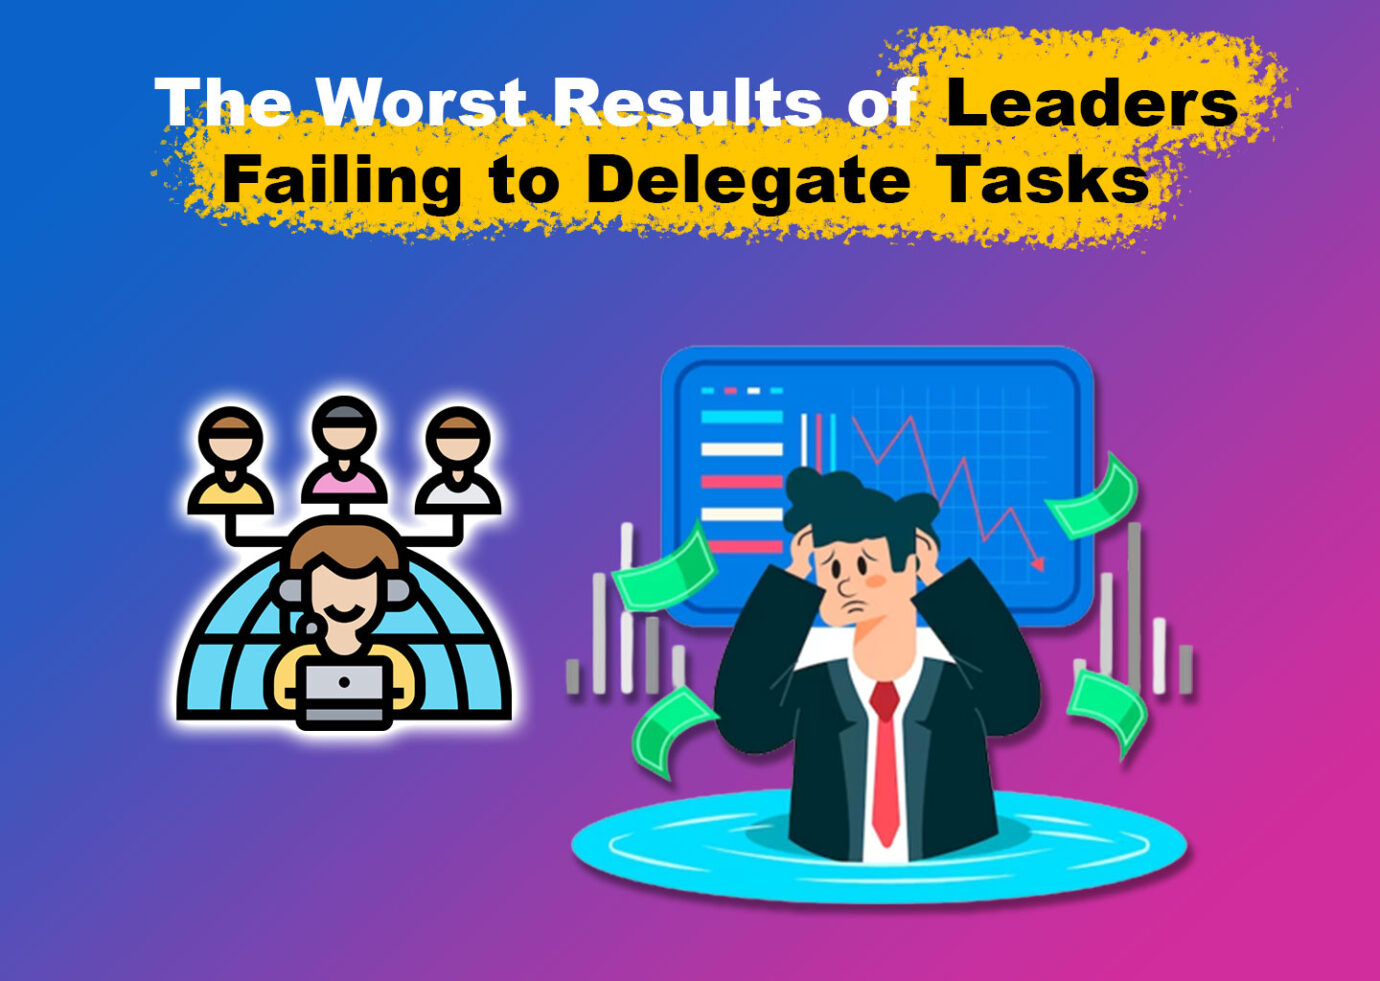  The Worst Results of Leaders Failing to Delegate Tasks